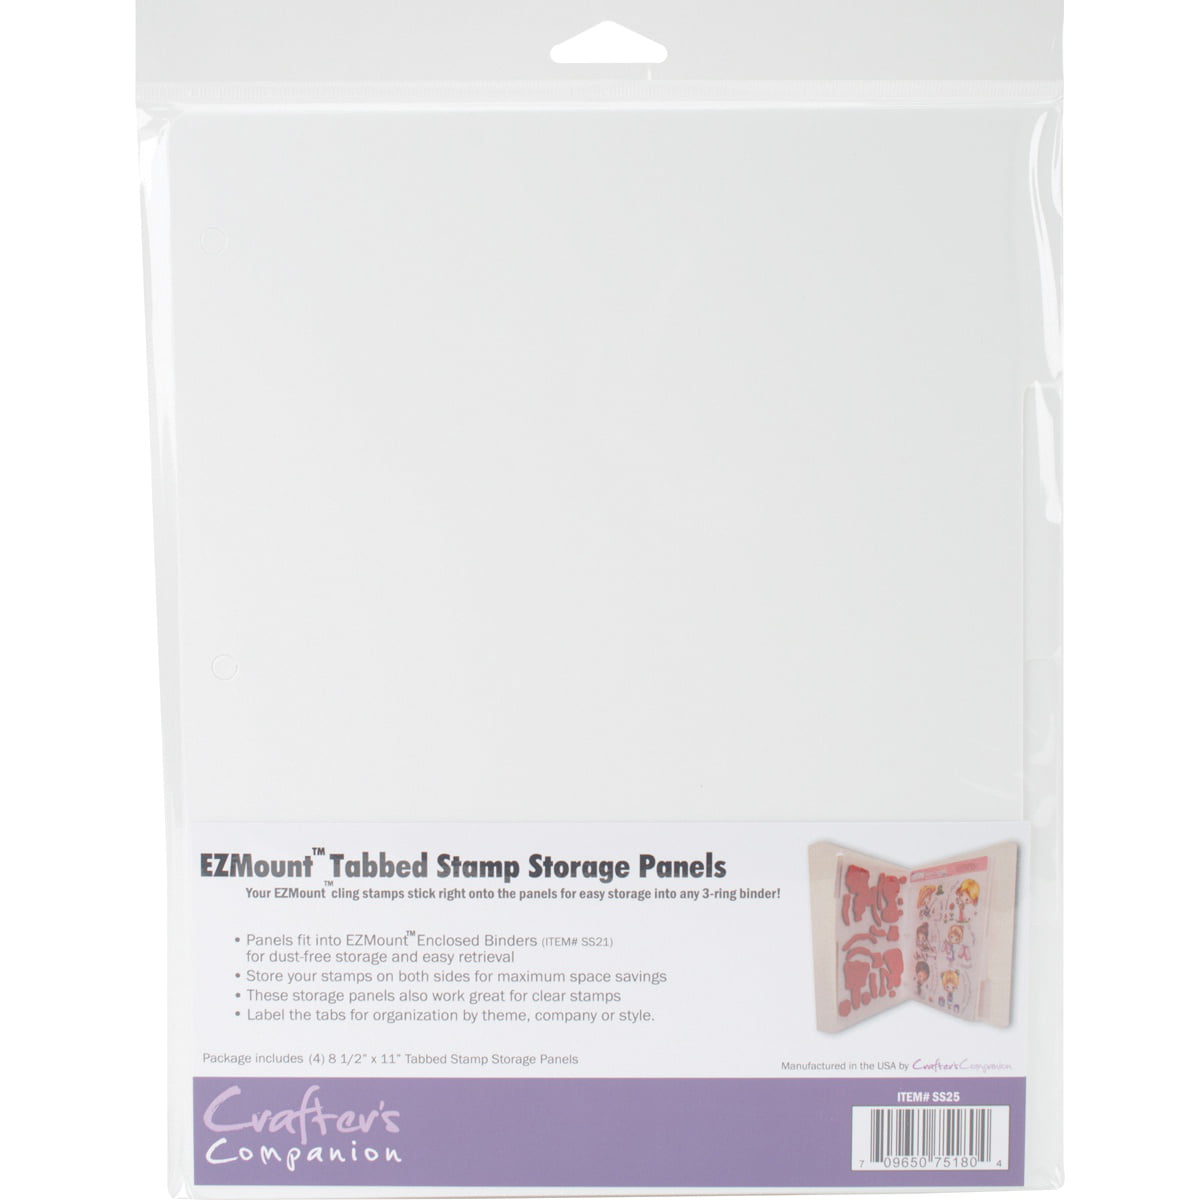 EZMount 8.5x11 Tabbed Stamp Storage Panels 4 Count, Multipack of 6 